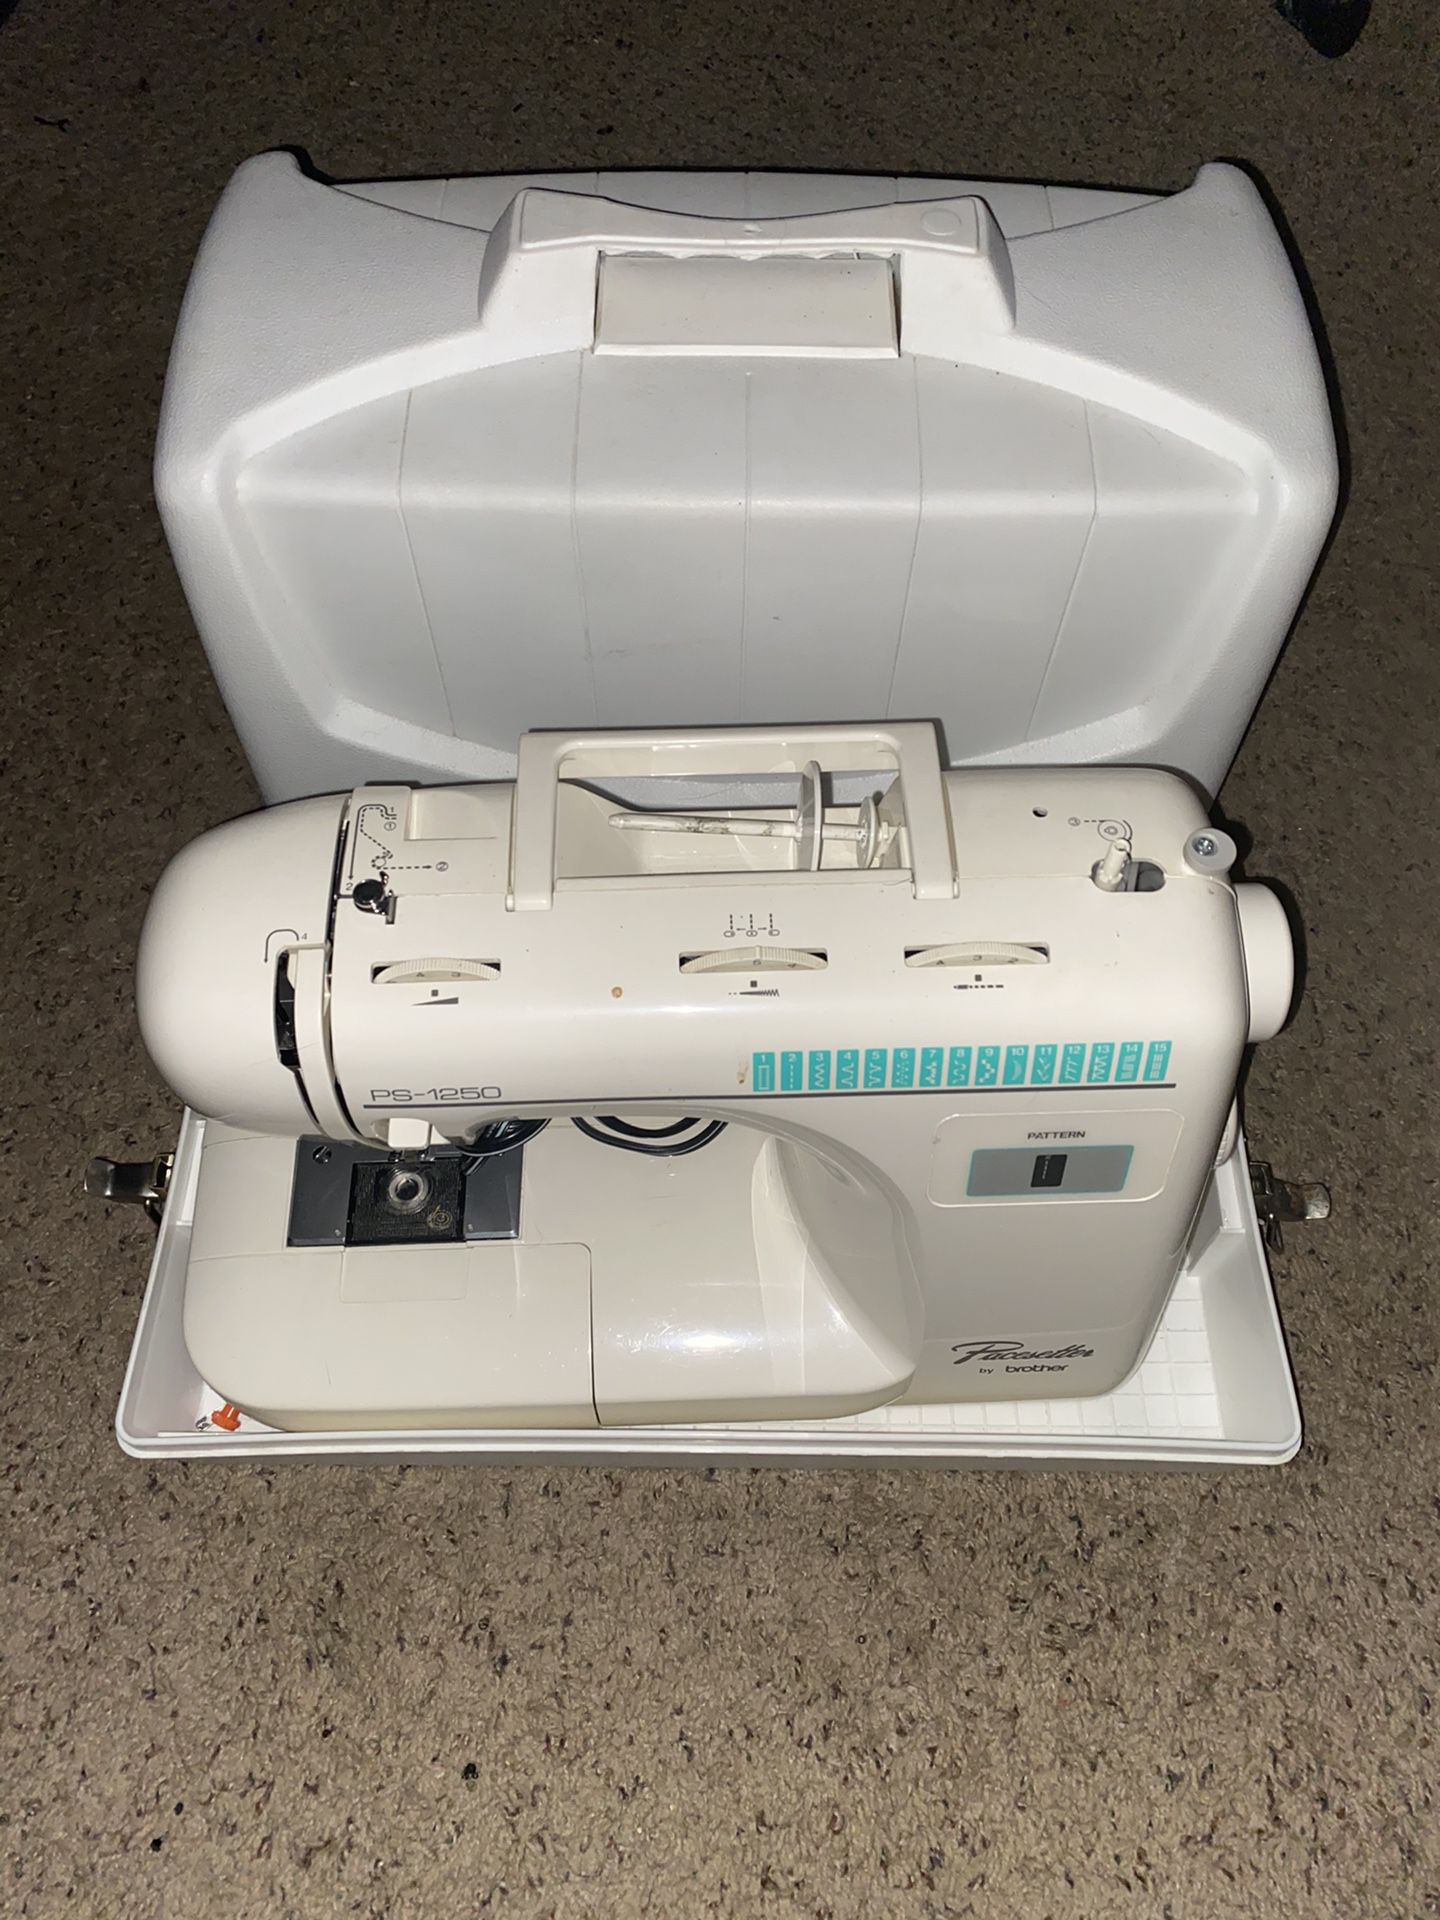 Brother PS-1250 Sewing Machine